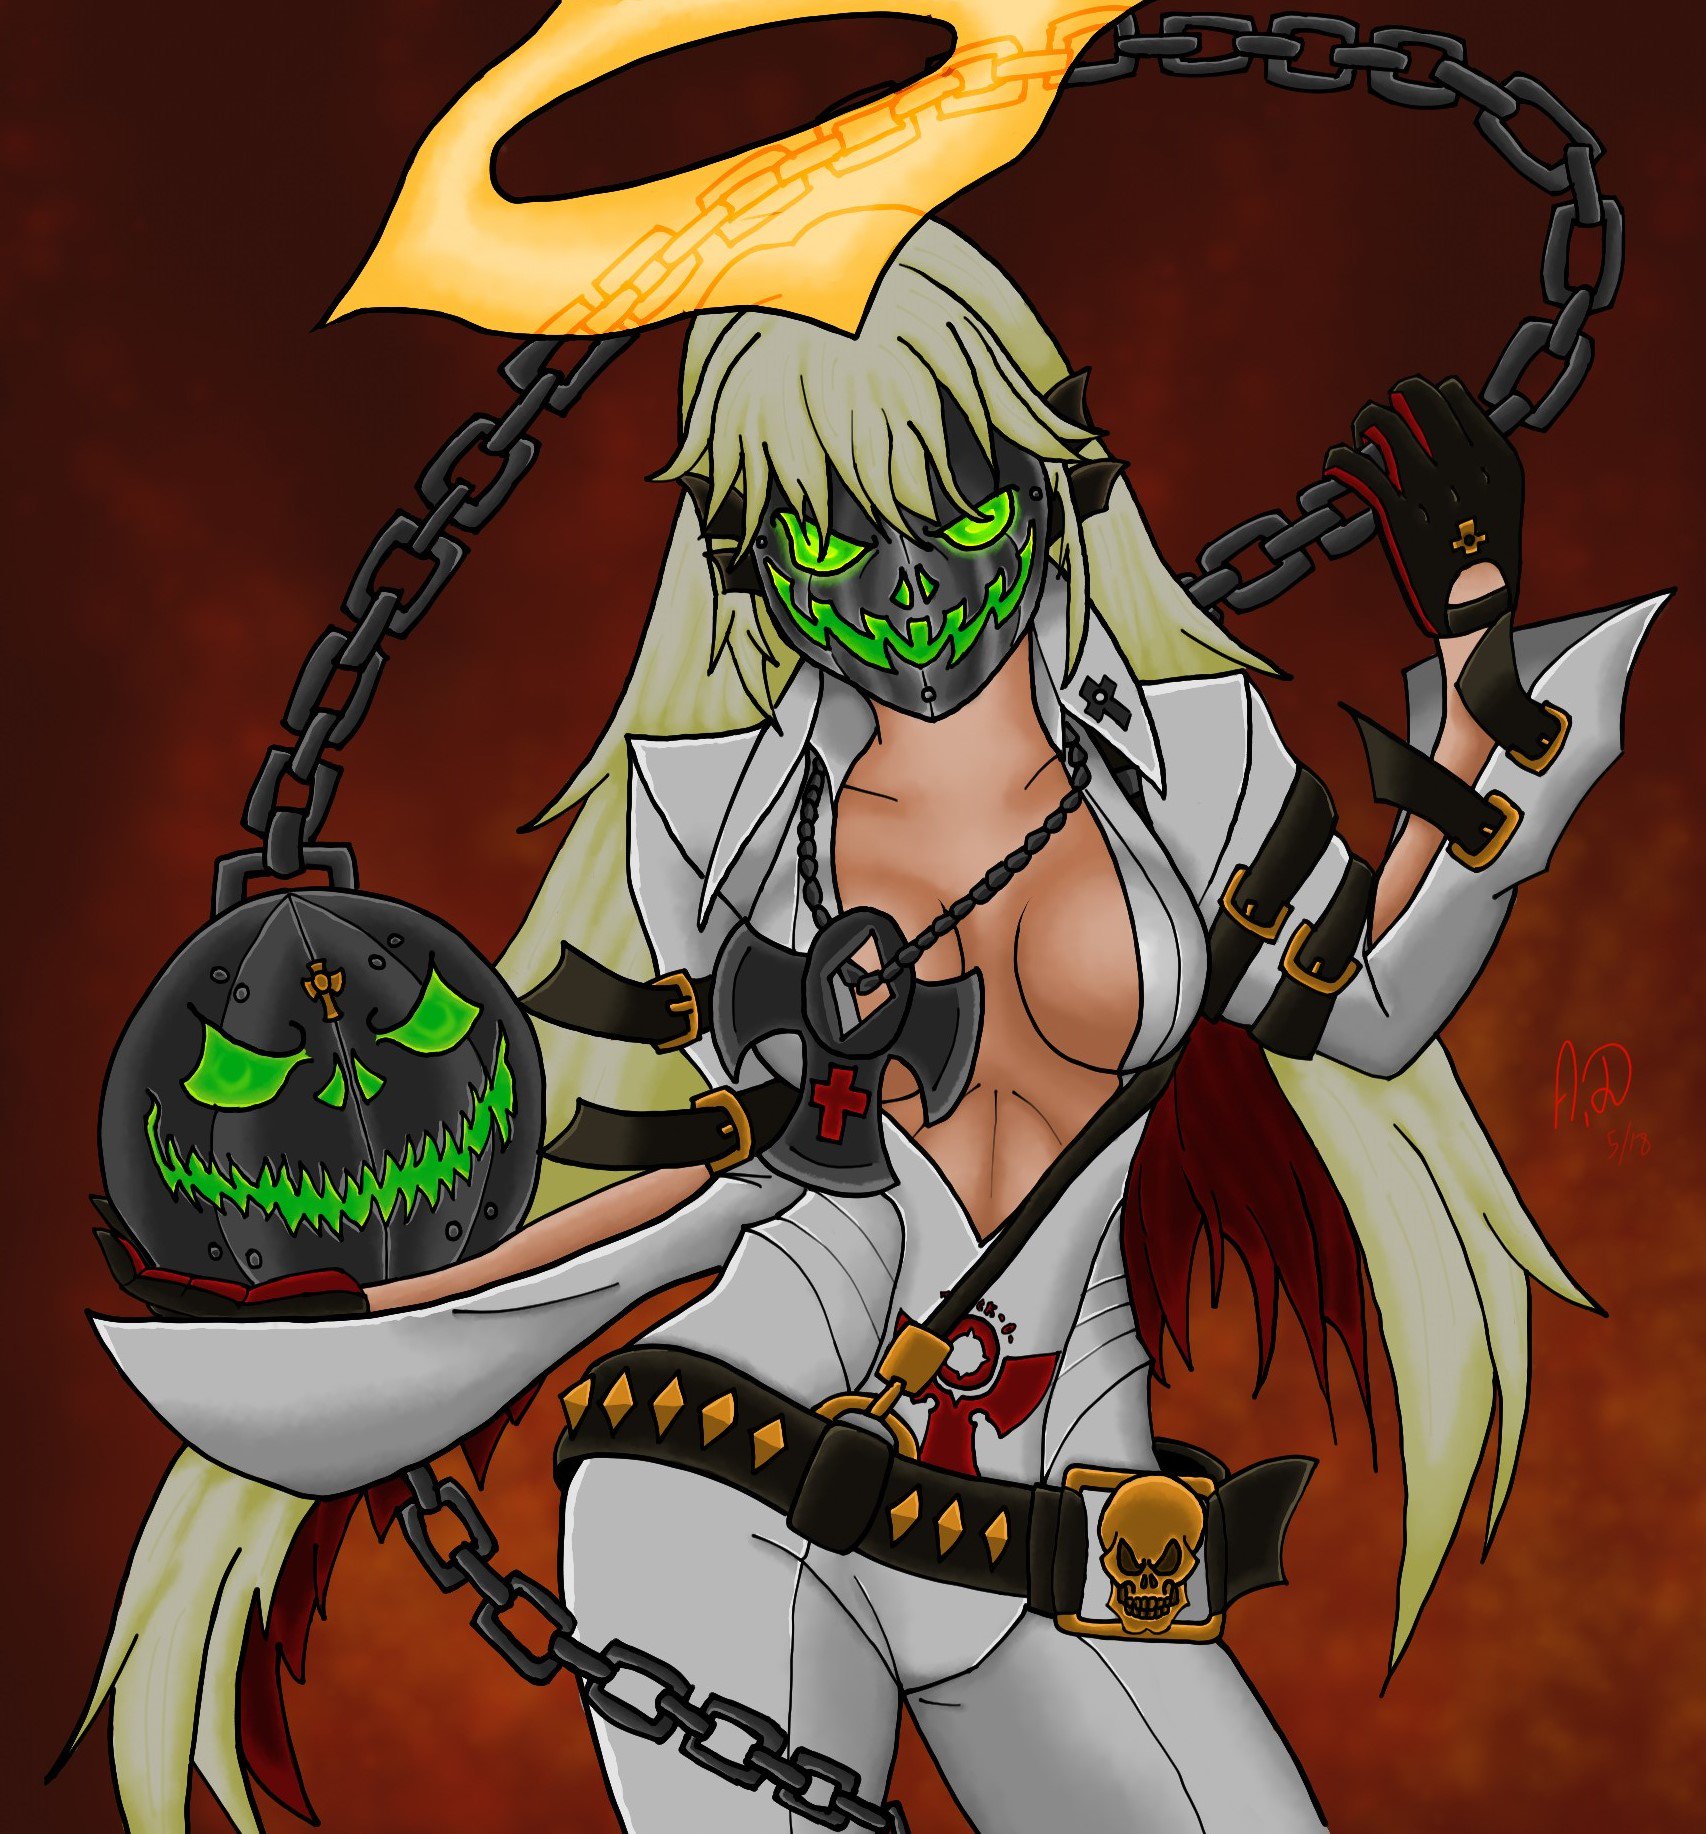 “Finished a drawing of Jack-o from Guilty Gear #art #guiltygear #ggxrd” .